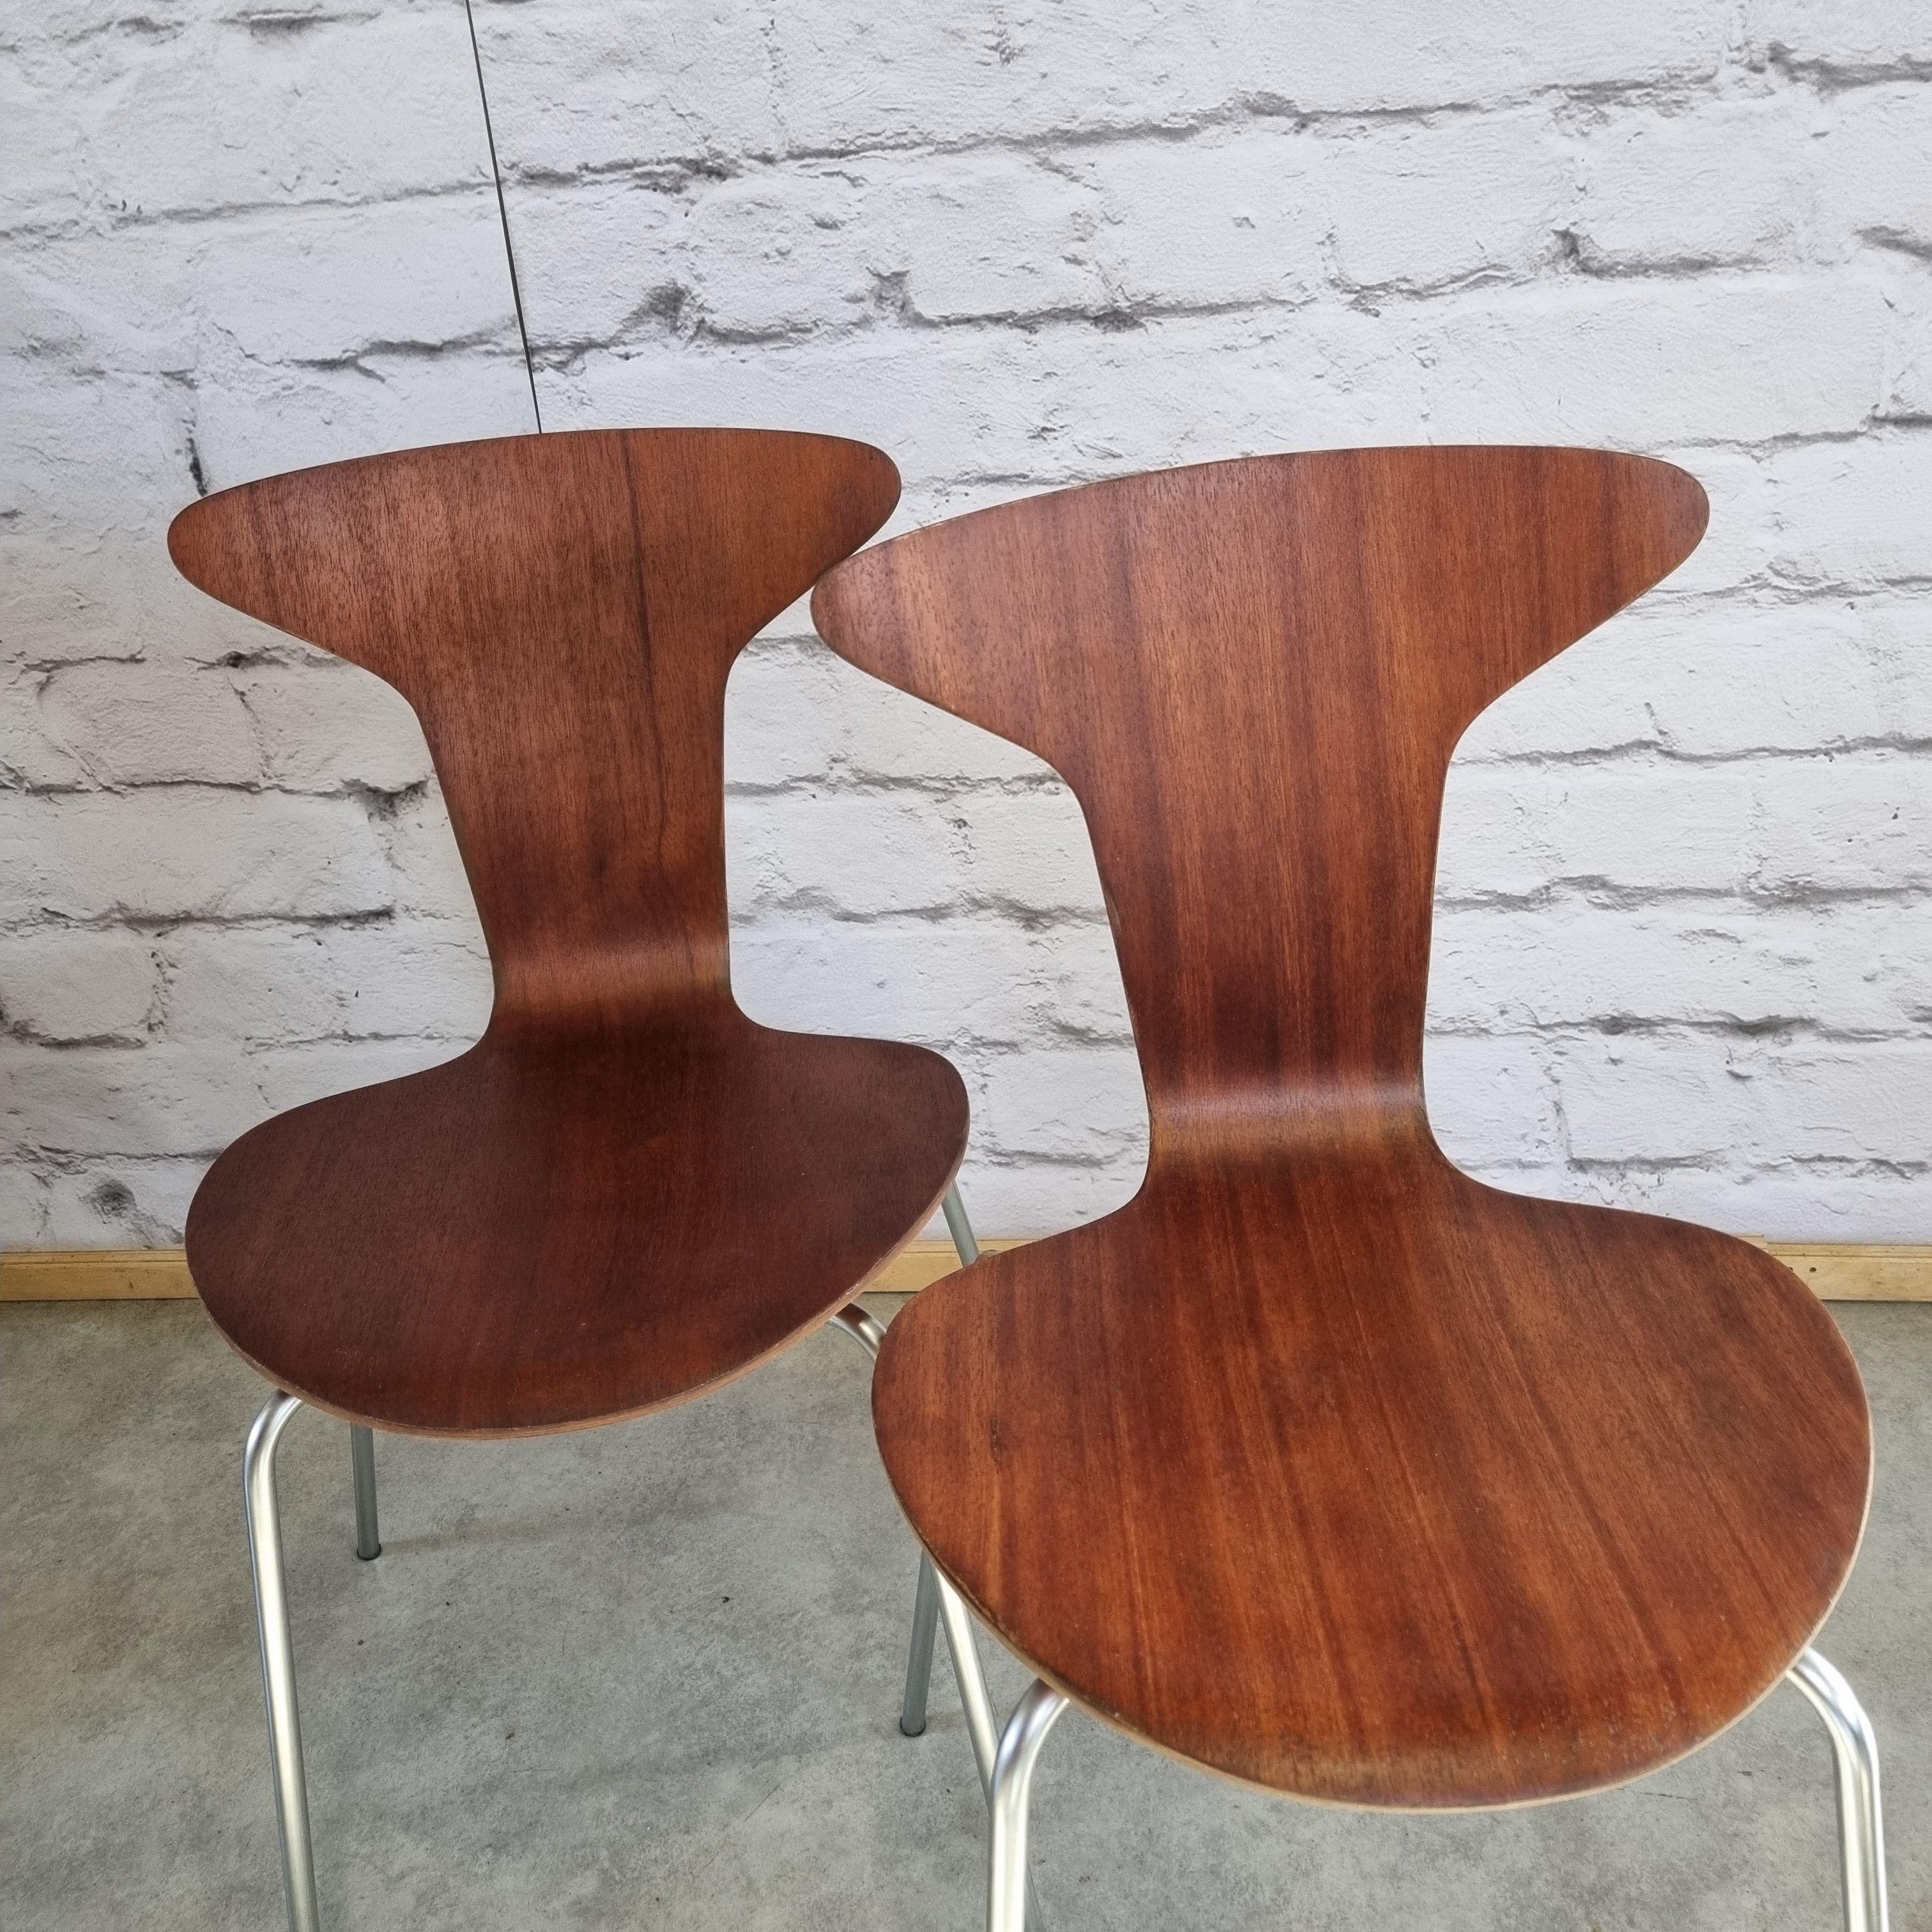 Mosquito model no. 3105, designed by arne jacobsen for Fritz Hansen, Denmark in the 1950s. Chairs are made of bent laminated plywood finished in teak veneer. Supported by sturdy chrome legs. Can be used as dining, office or side chairs. Early